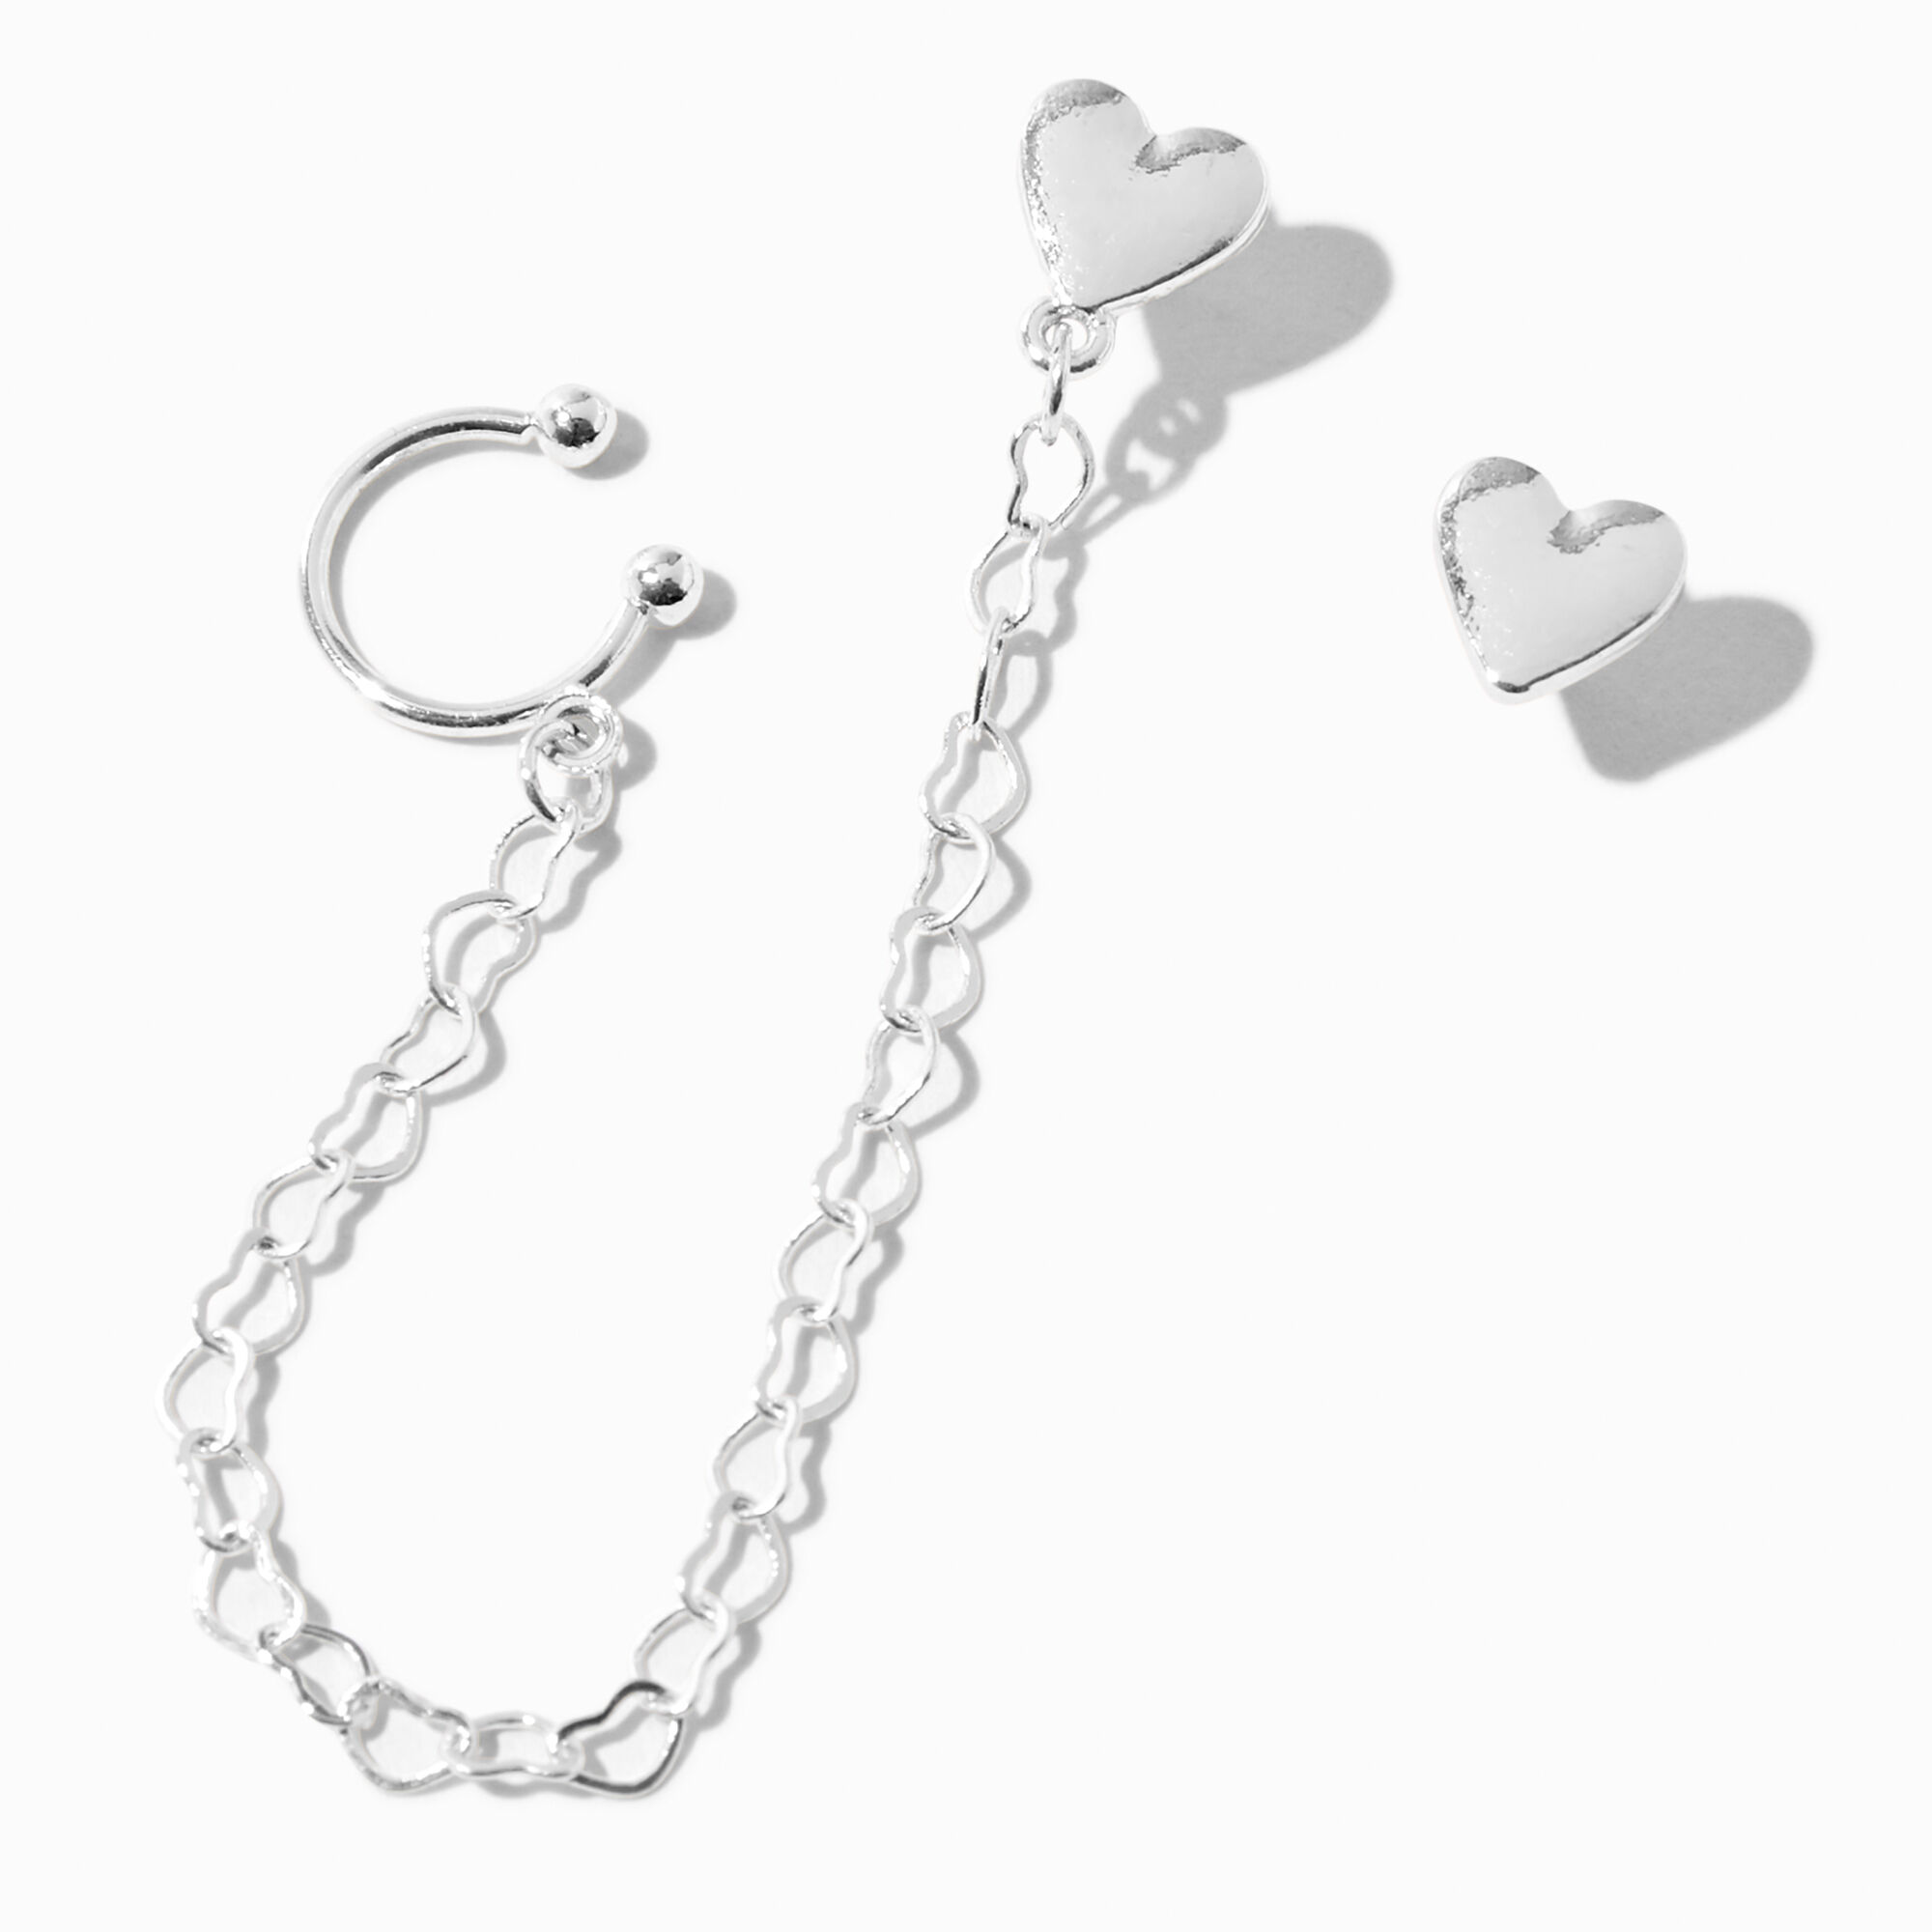 View Claires Tone Heart Ear Connector Earrings Silver information